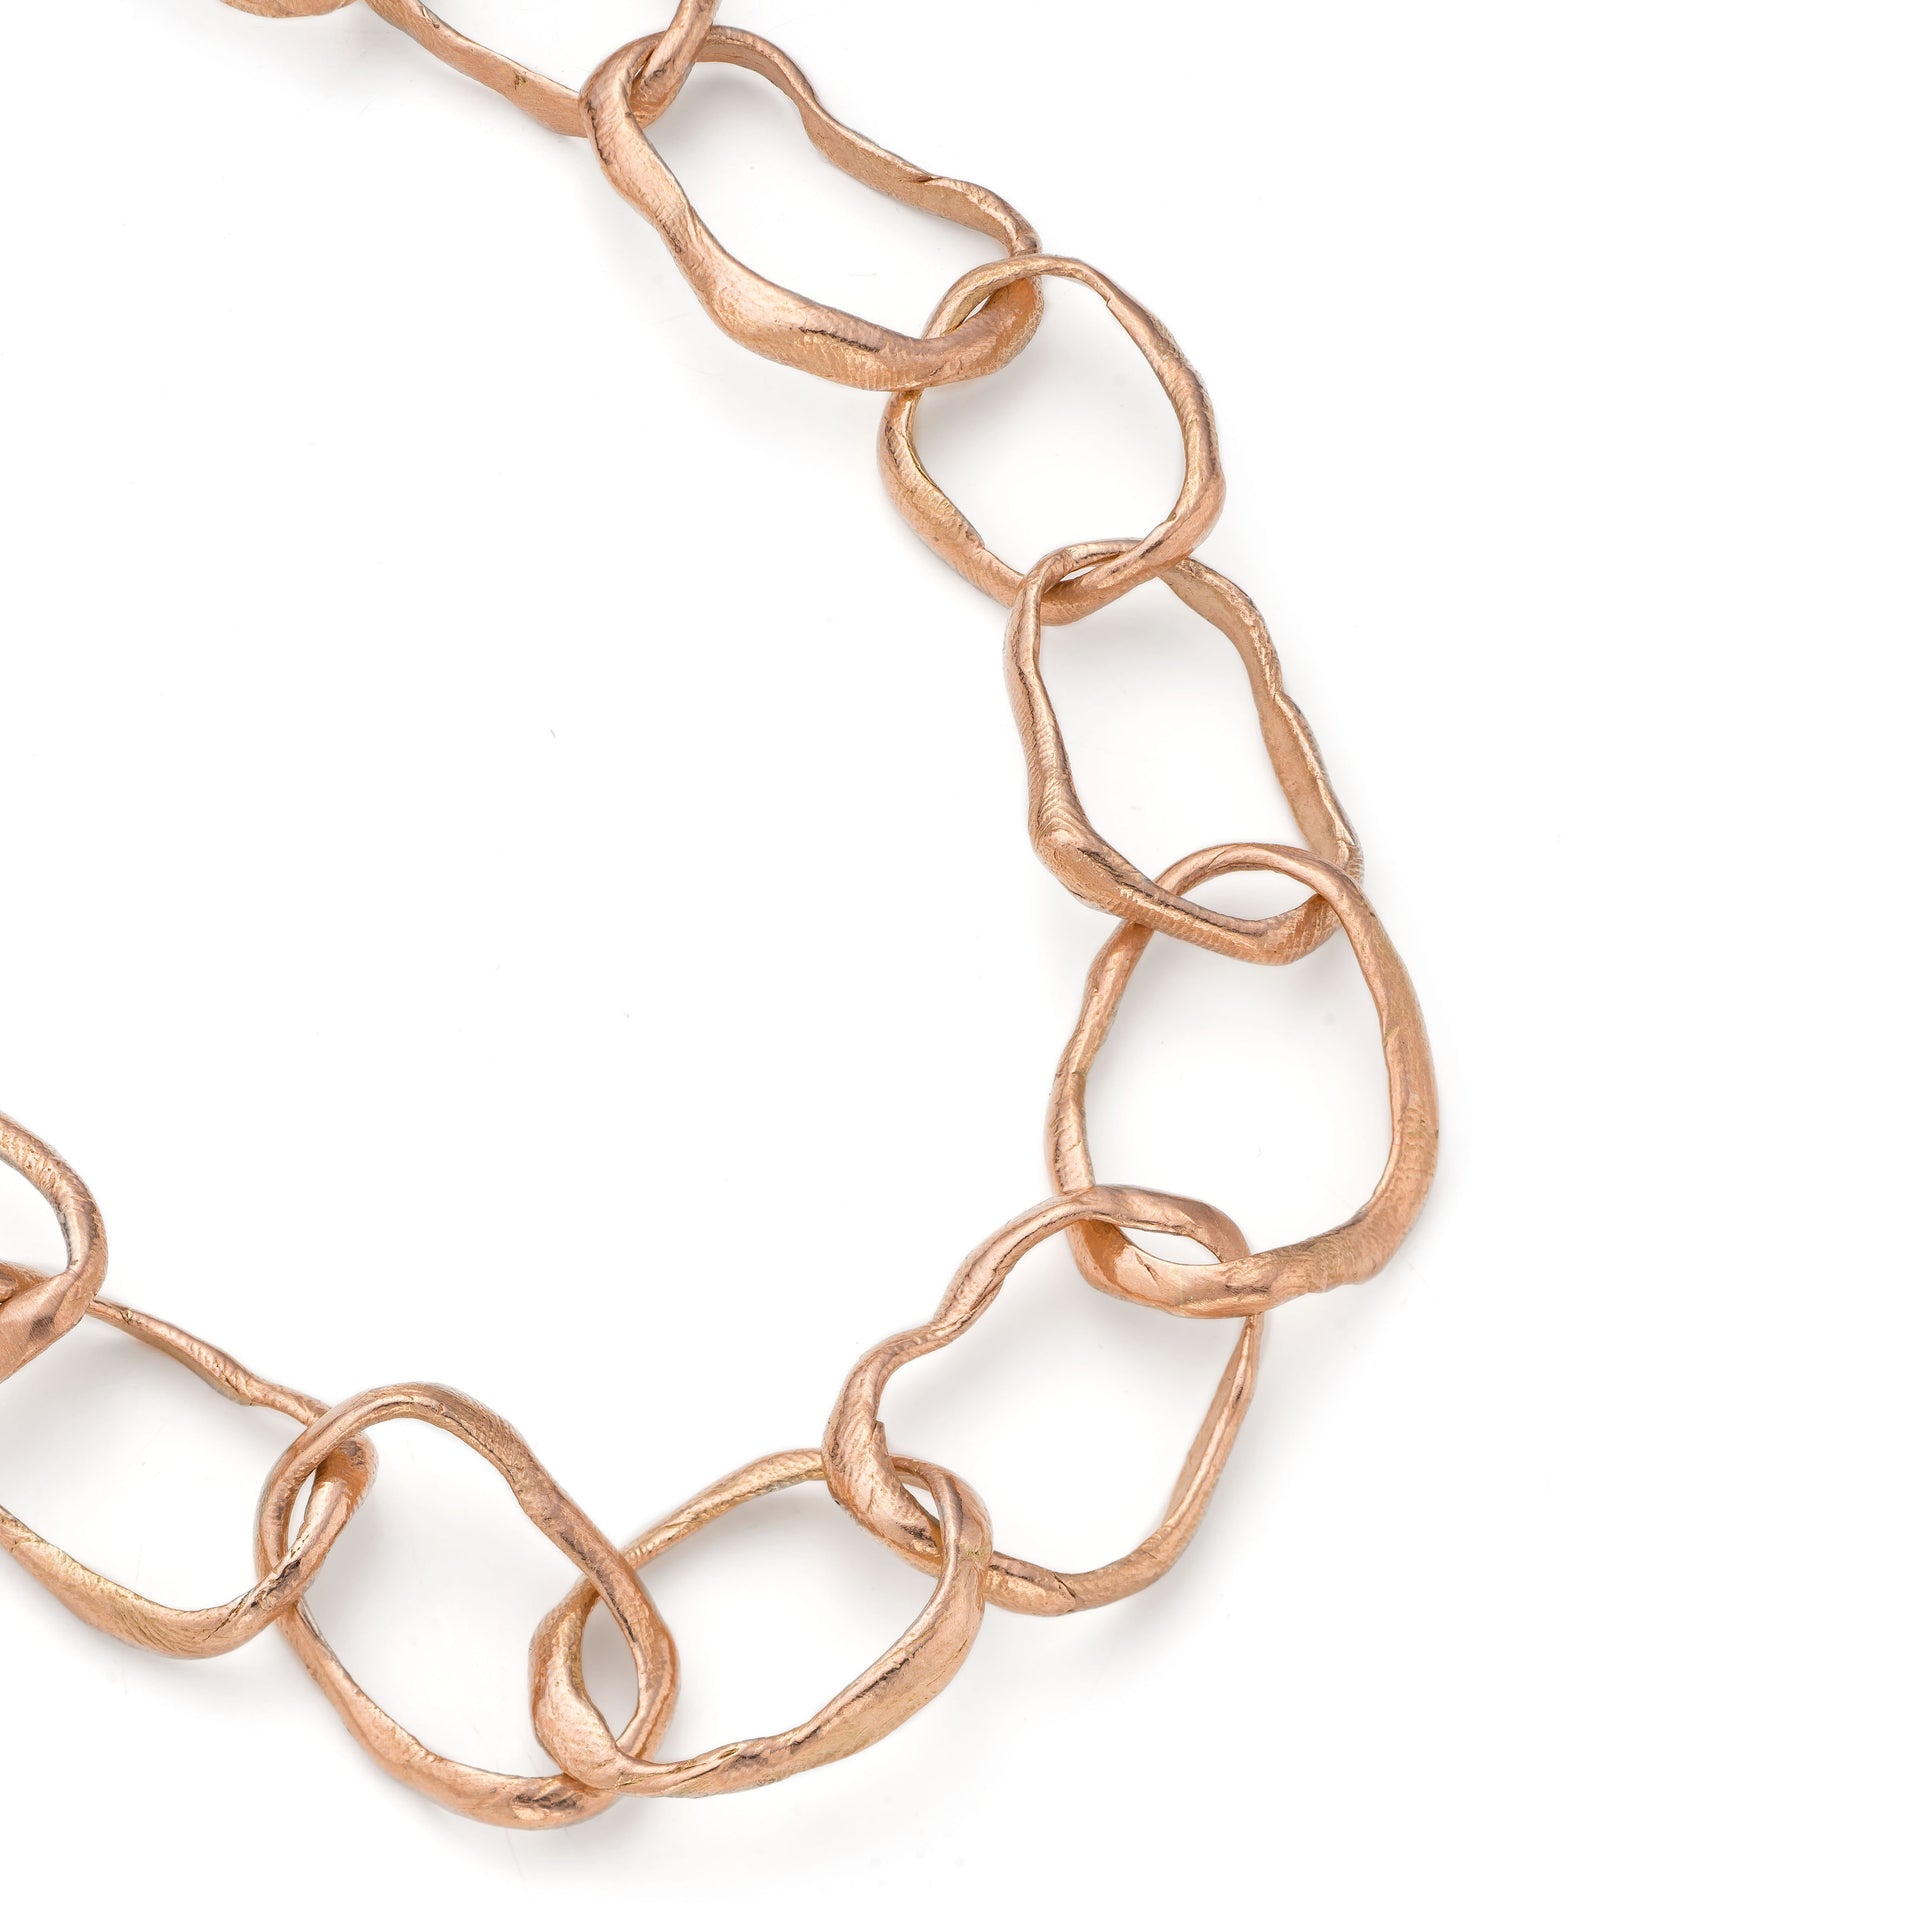 Detail of the hand crafted, irregular, solid rose gold links that make up the chain in Emily Nixon's Stone Drawing Necklace. Each link has been handmade to be different. The gold chain links retain a lustre without being overly shiny. Tactile and utterly wearable, a relaxed gold necklace to put on everyday by Cornwall jewellery designer Emily Nixon..